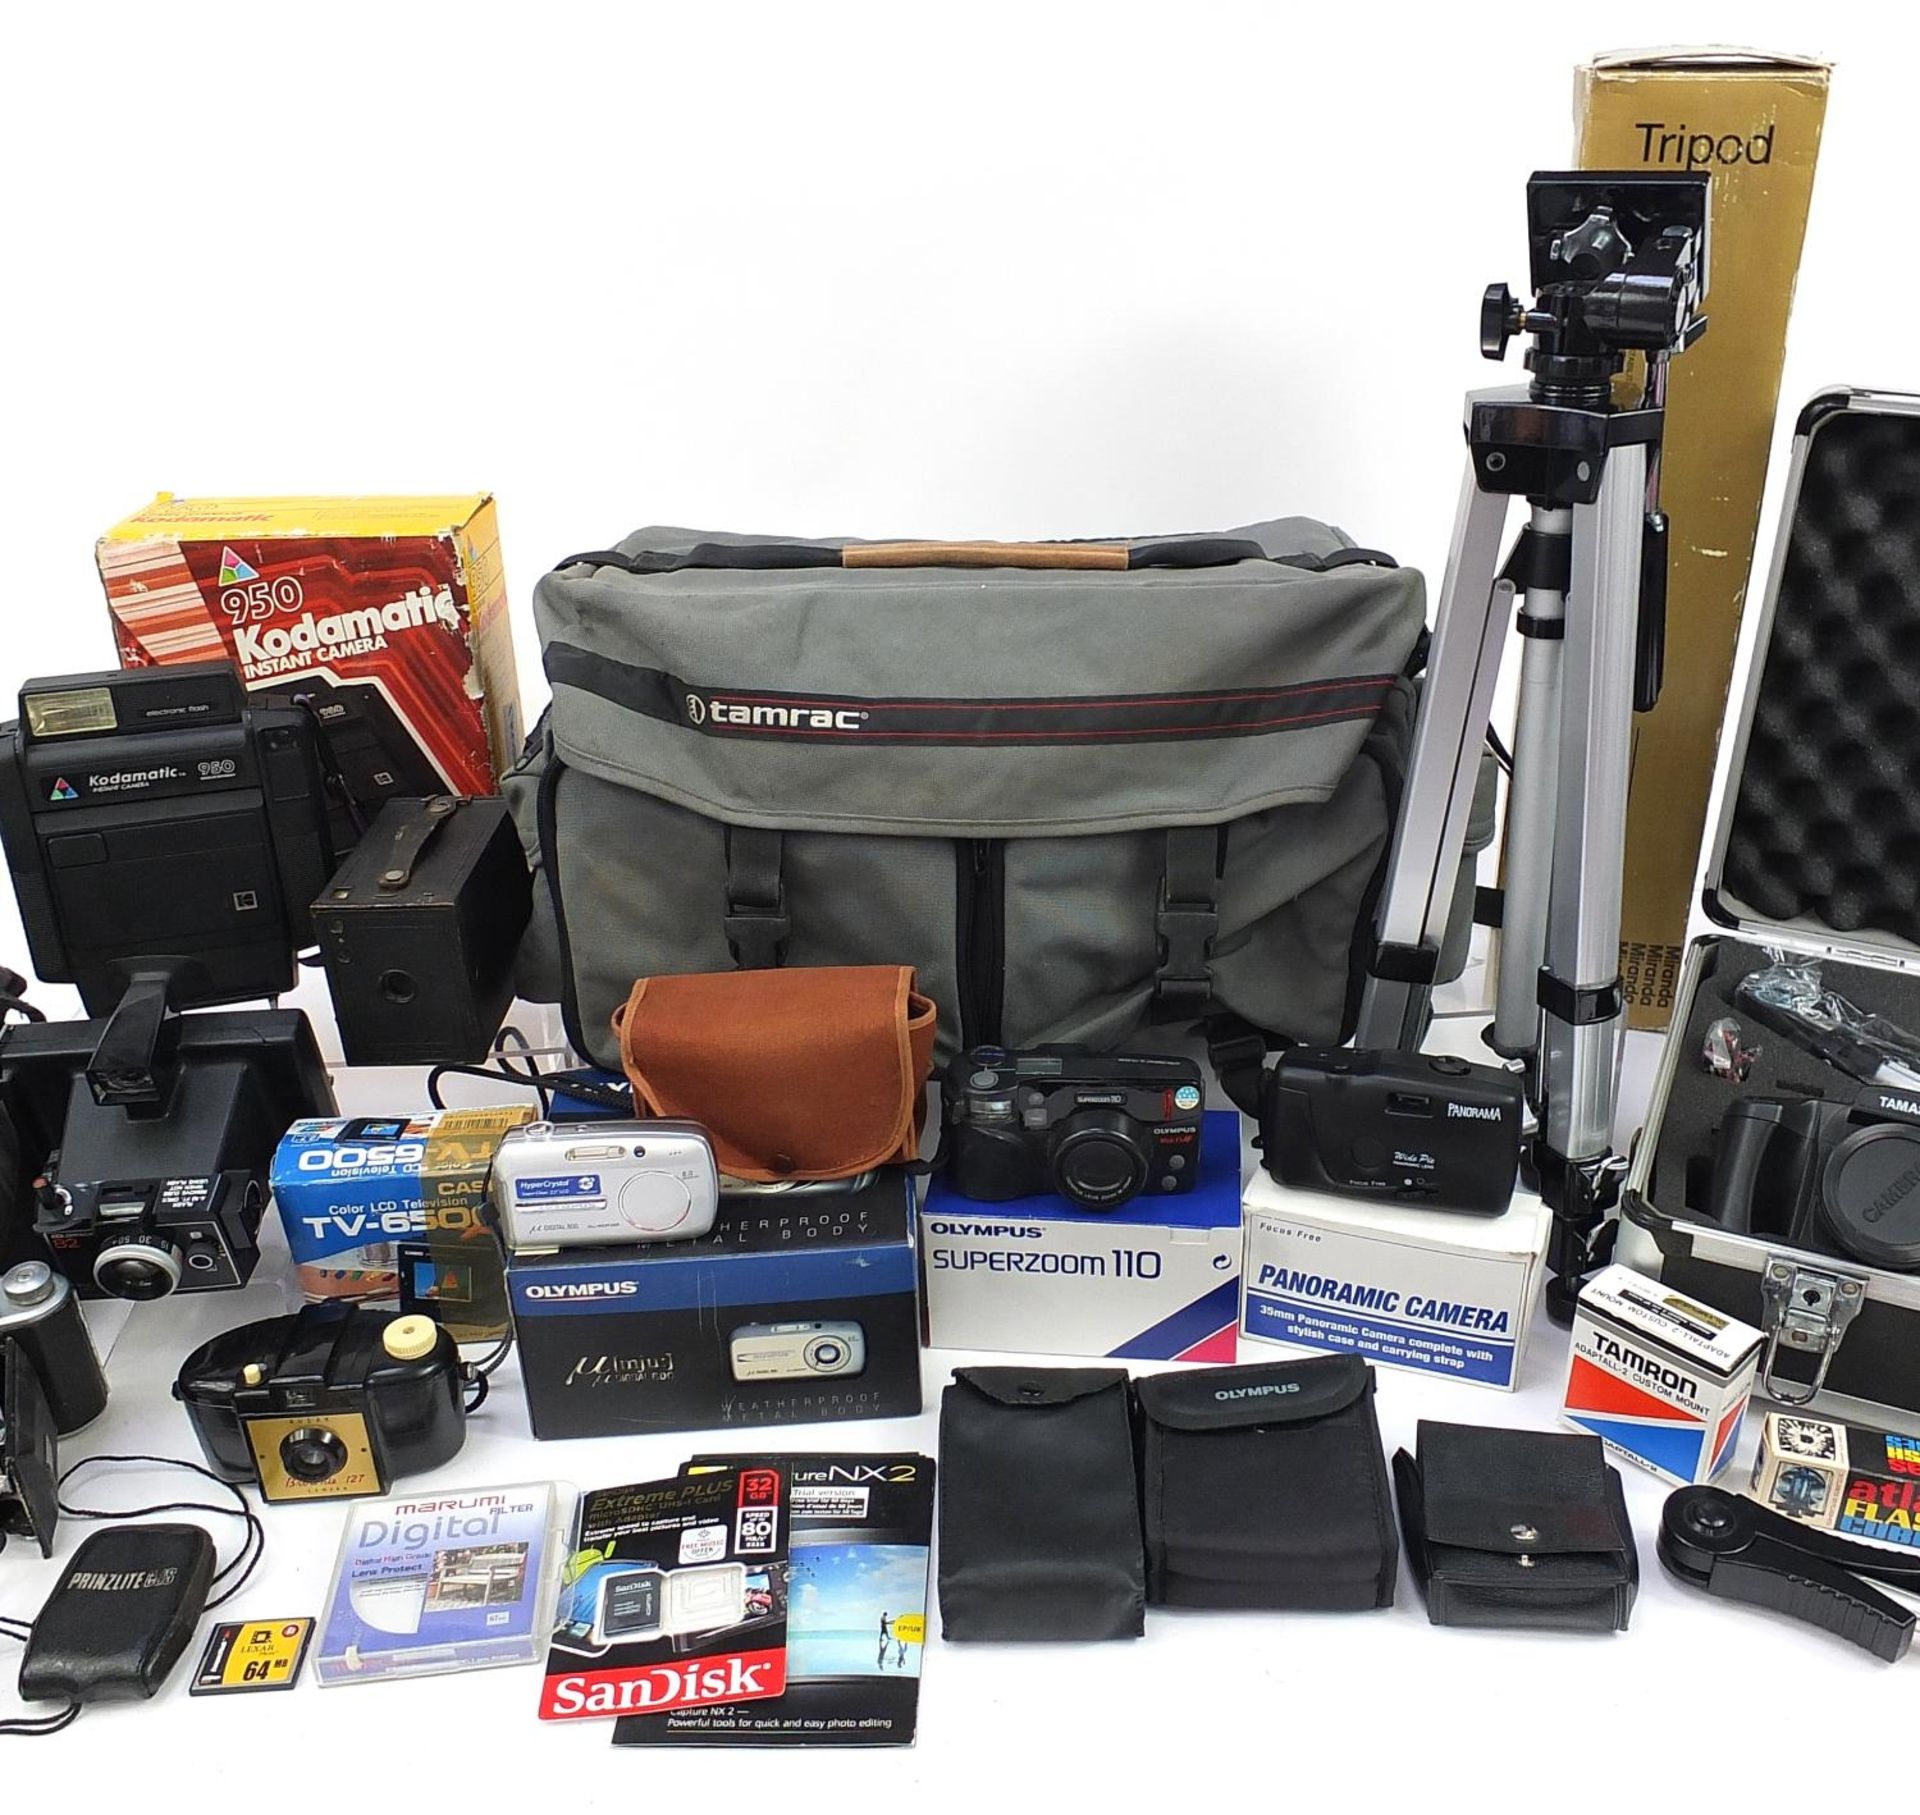 Collection of vintage and later cameras, lenses and accessories including Tamashi FMD with tripod - Image 3 of 4